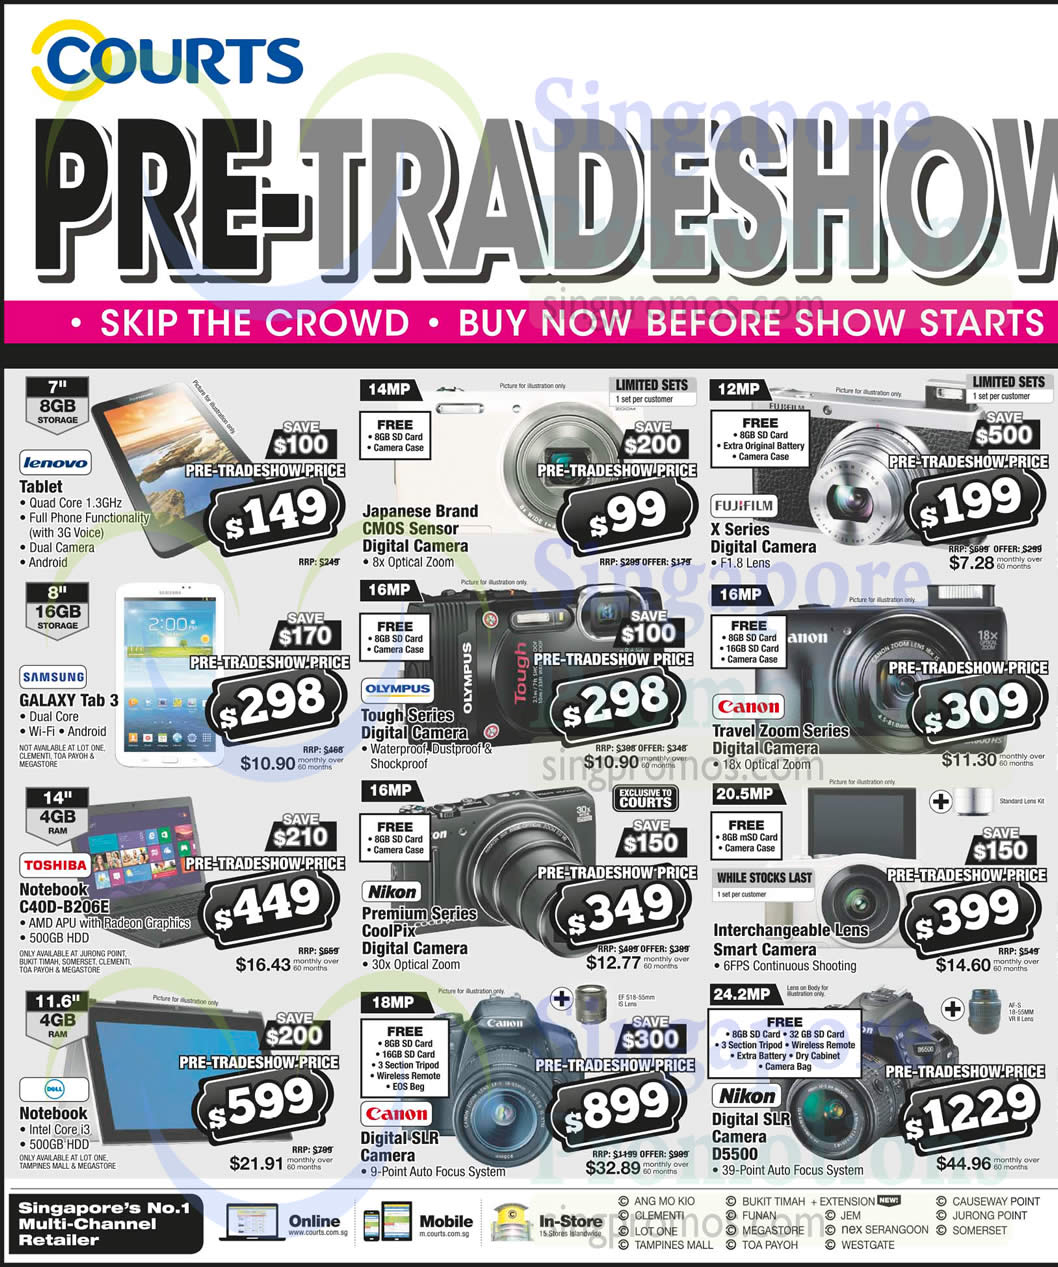 Featured image for Courts Up to 80% Off Pre-Tradeshow Sale 17 - 19 Mar 2015